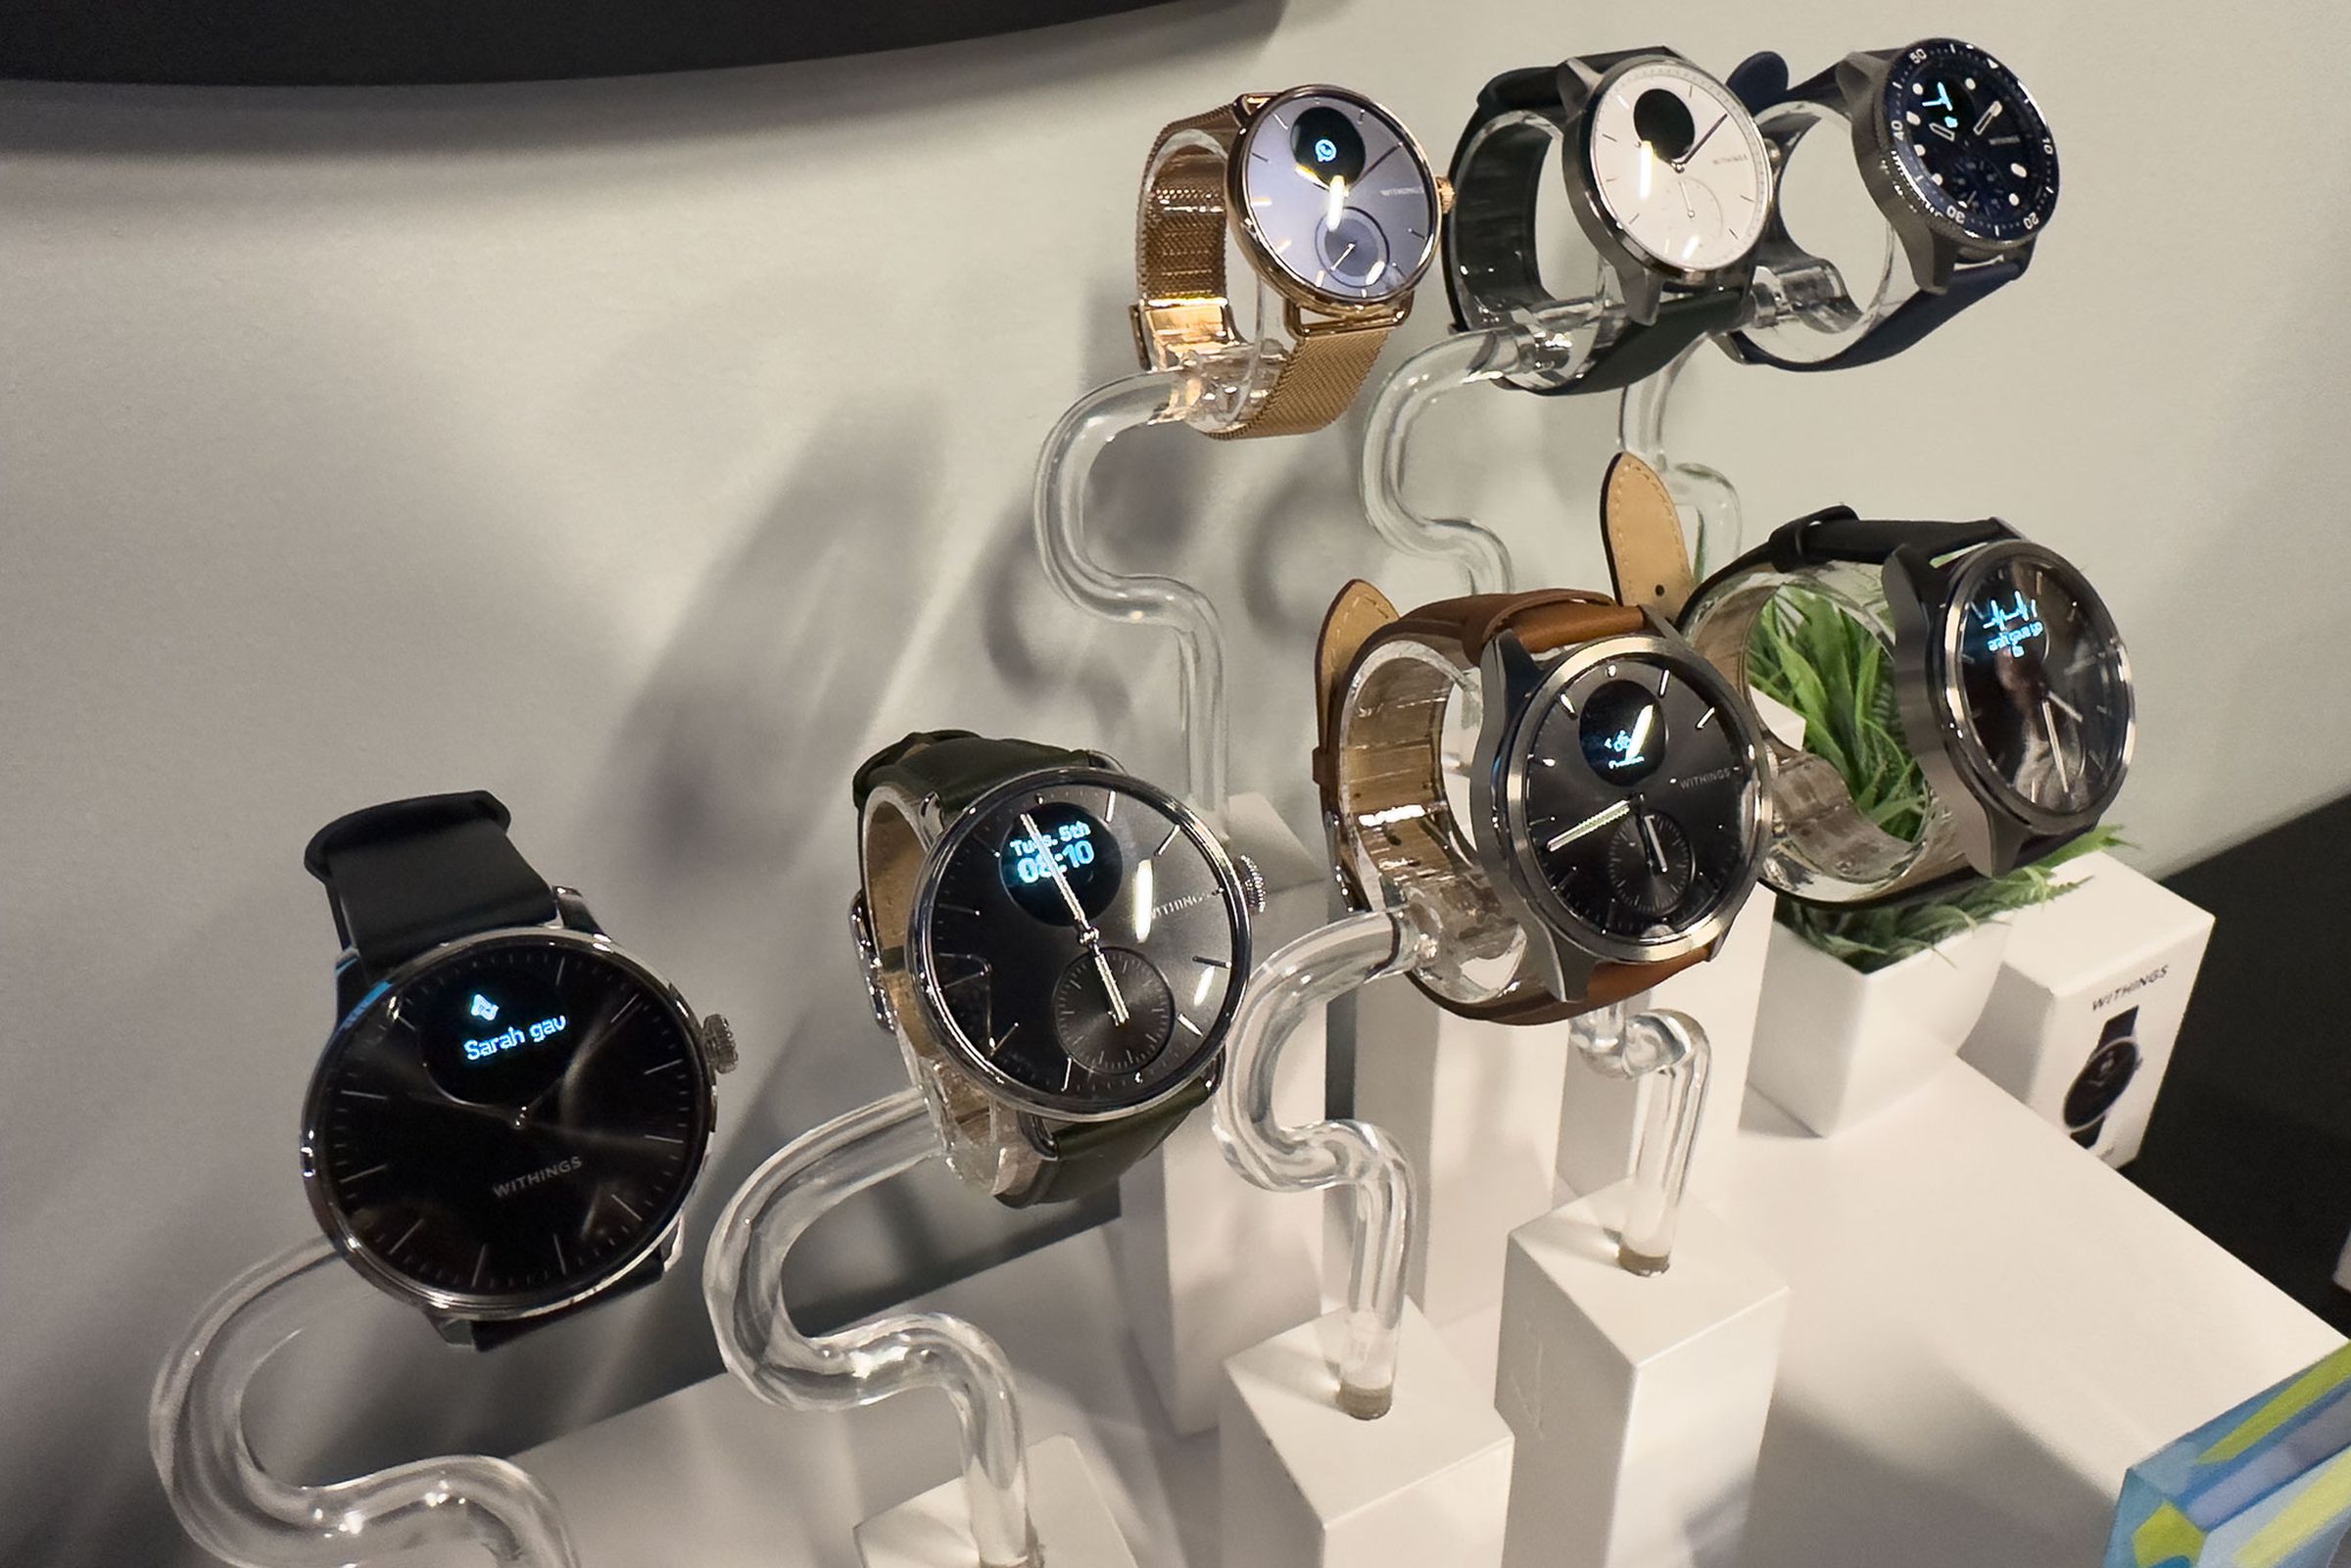 Two rows of smartwatches, the bottom row being the Withings ScanWatch 2 while the top row is the original ScanWatch.